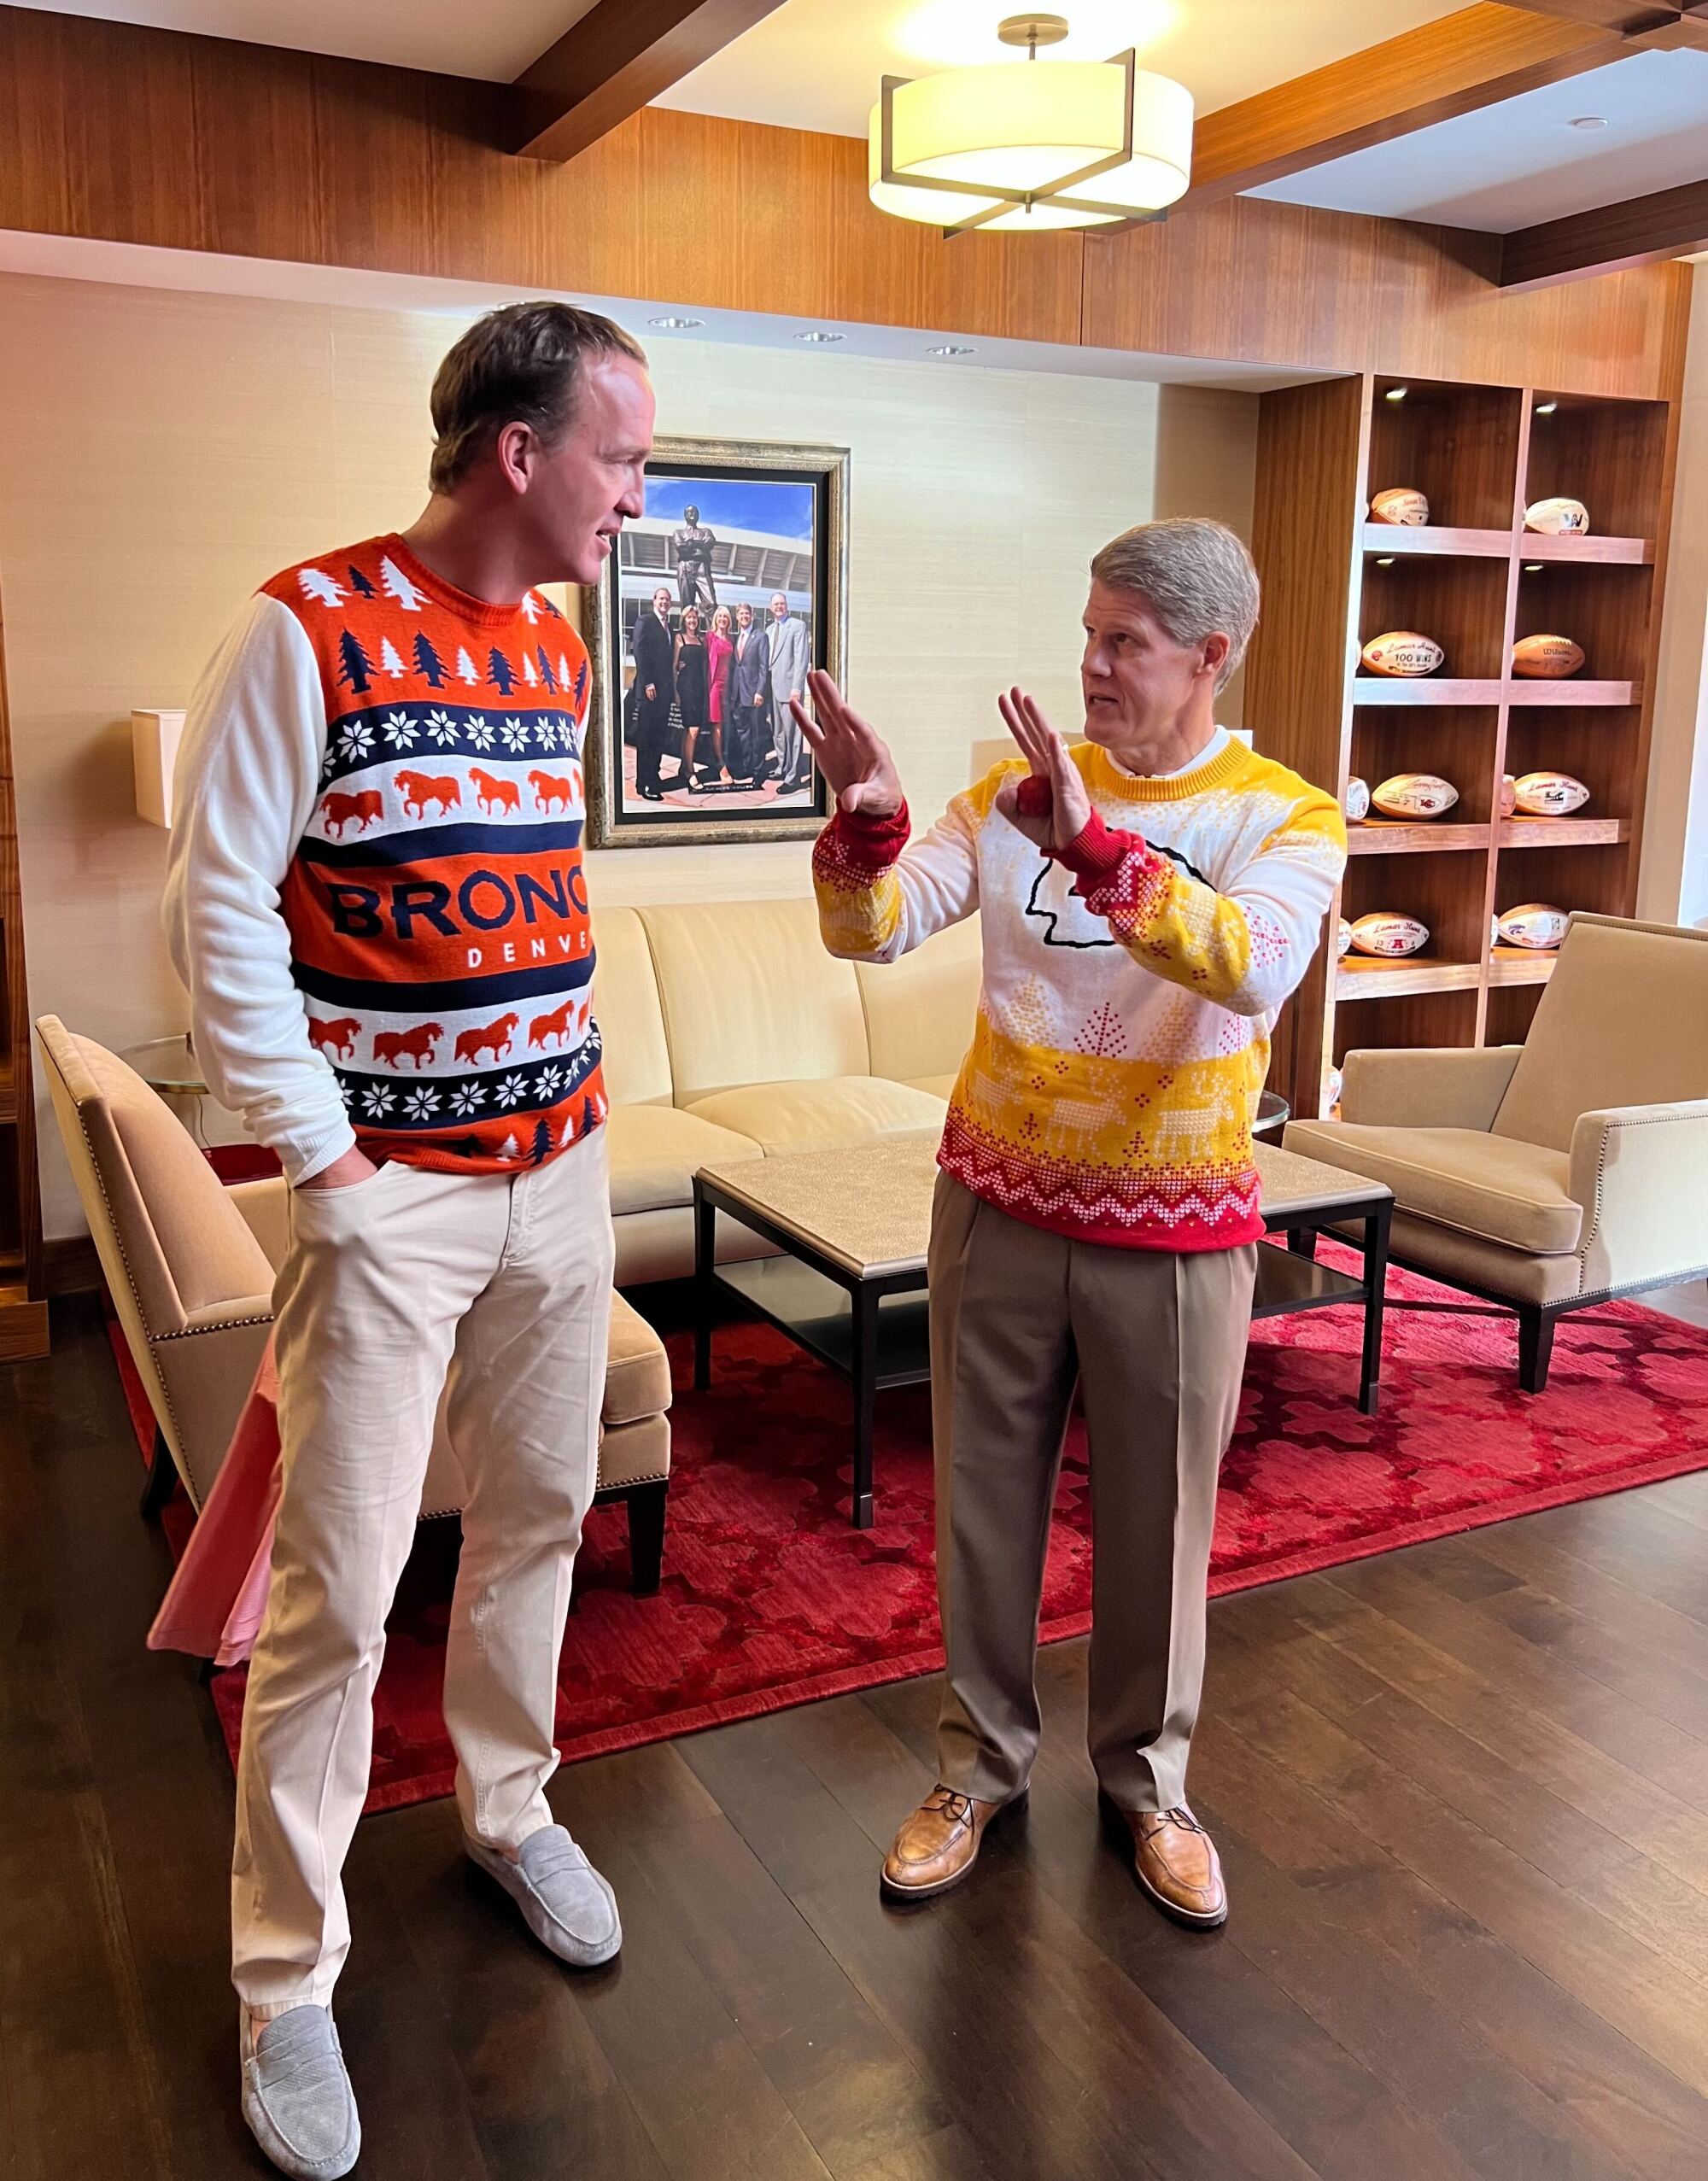 Clark Hunt talks to Peyton Manning, both in ugly Christmas sweaters, during a filming inside the in-stadium apartment.